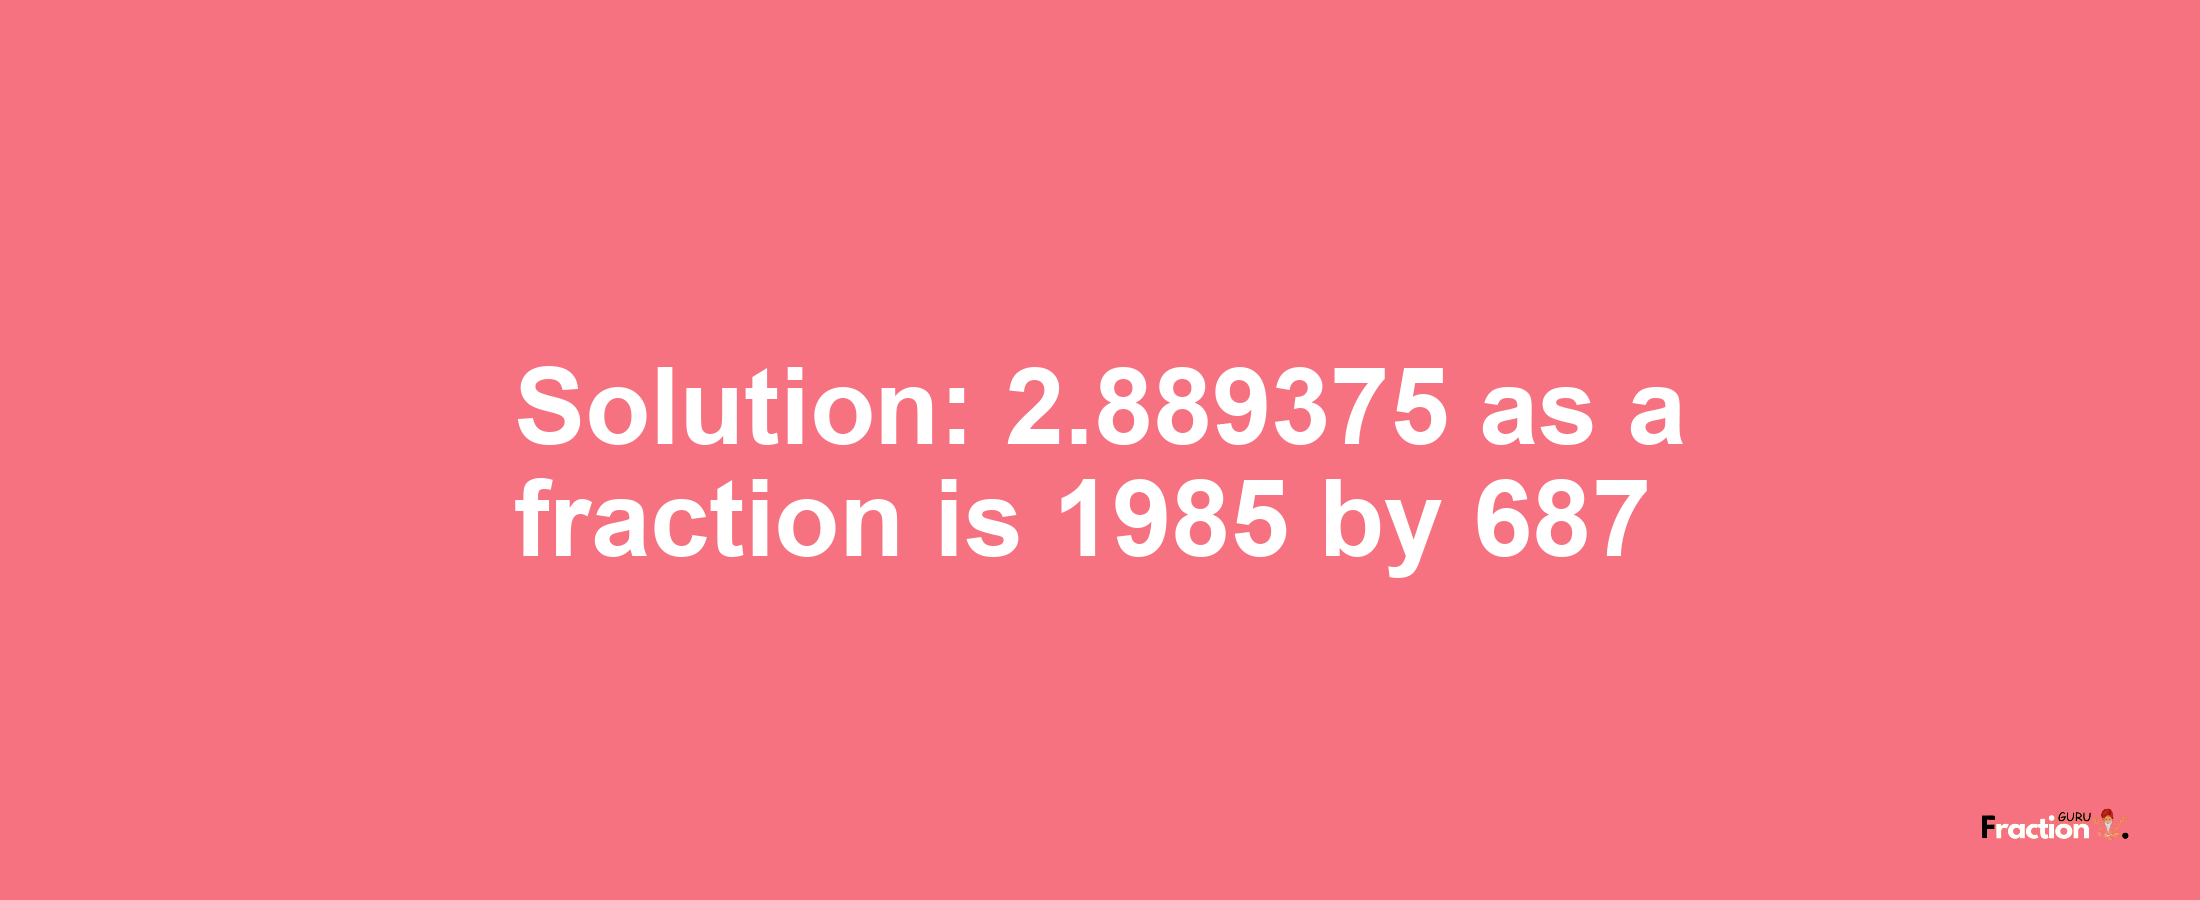 Solution:2.889375 as a fraction is 1985/687